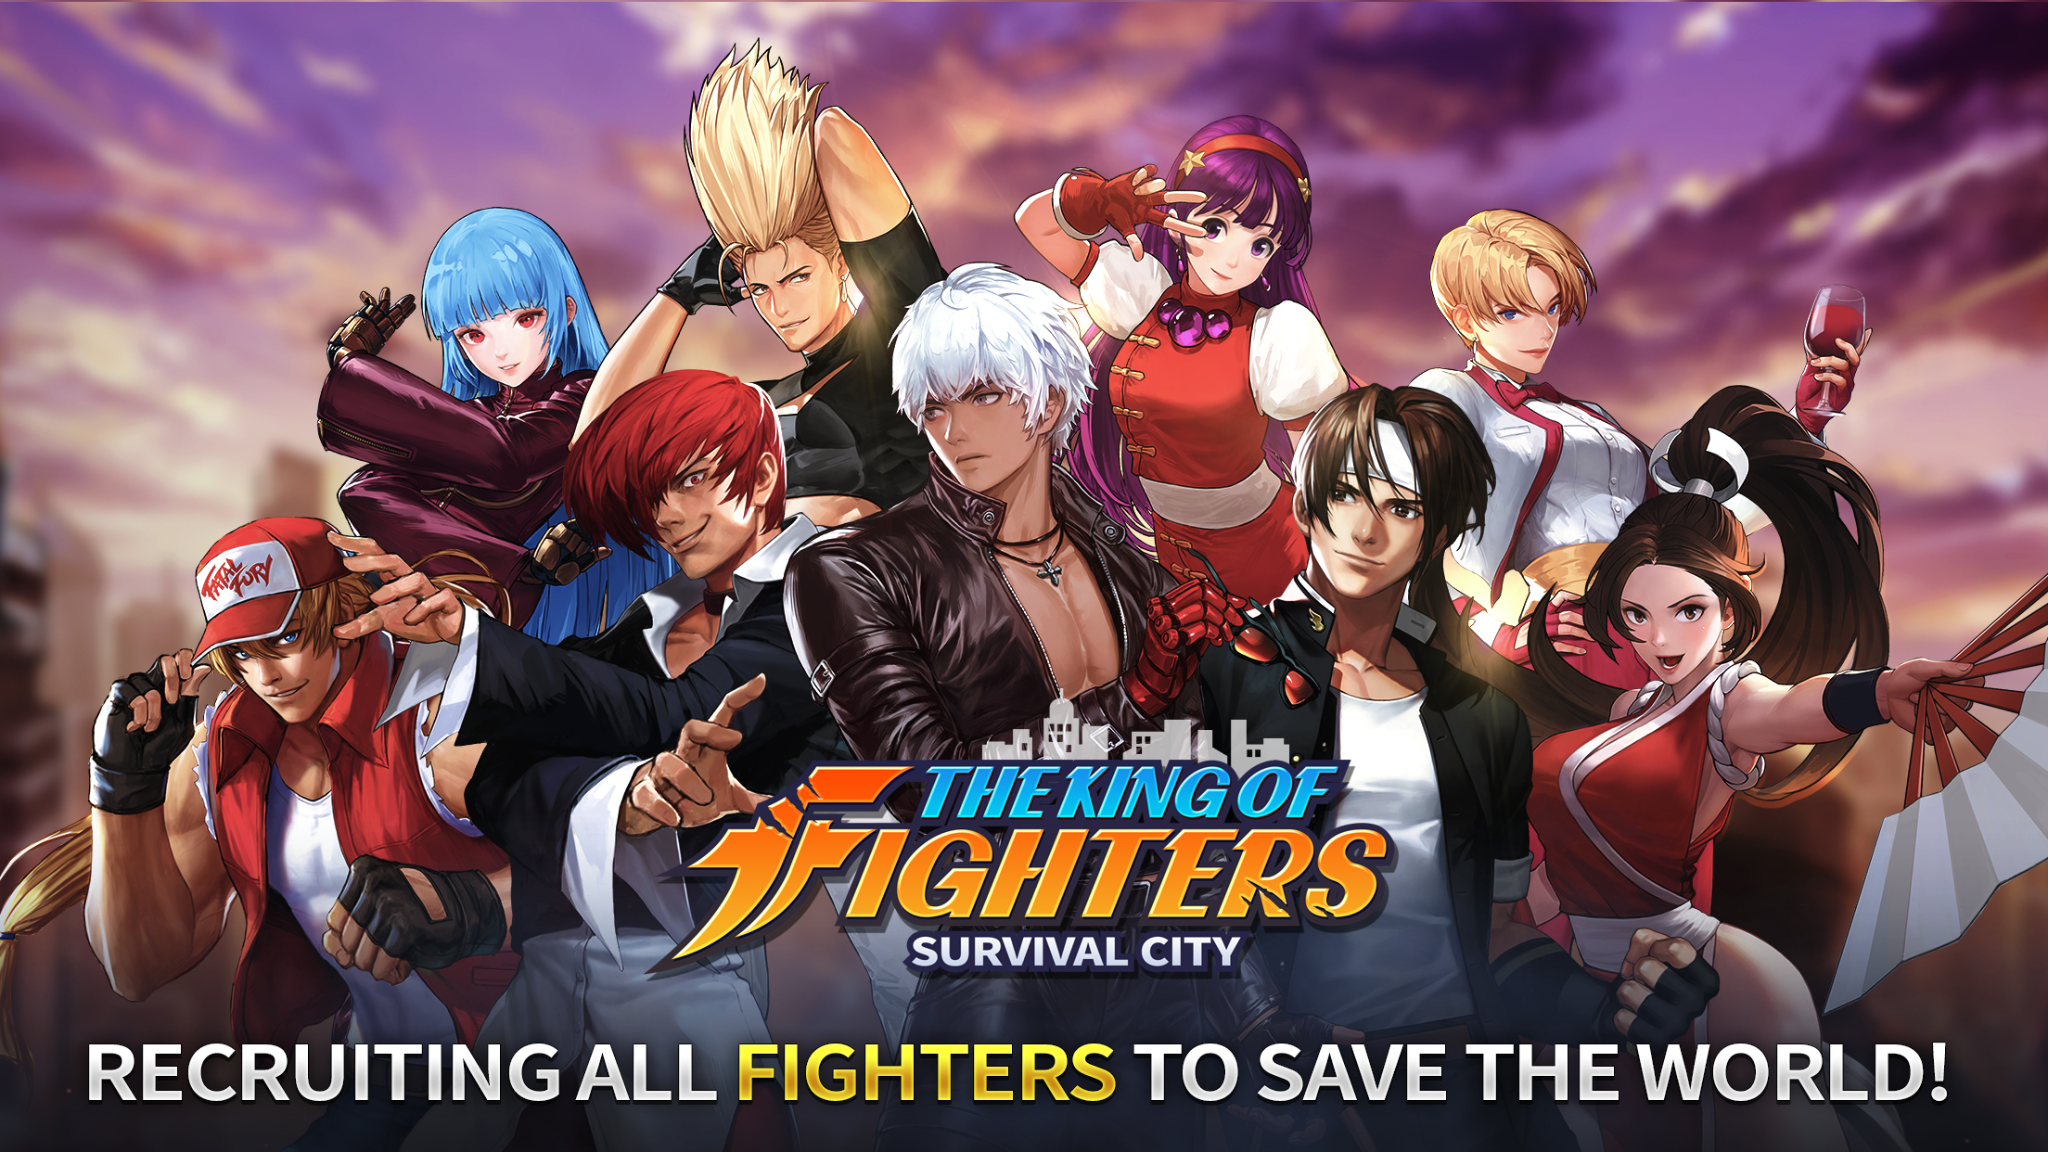 Building the Best Team: King of Fighters Survival City Character Tier Guide